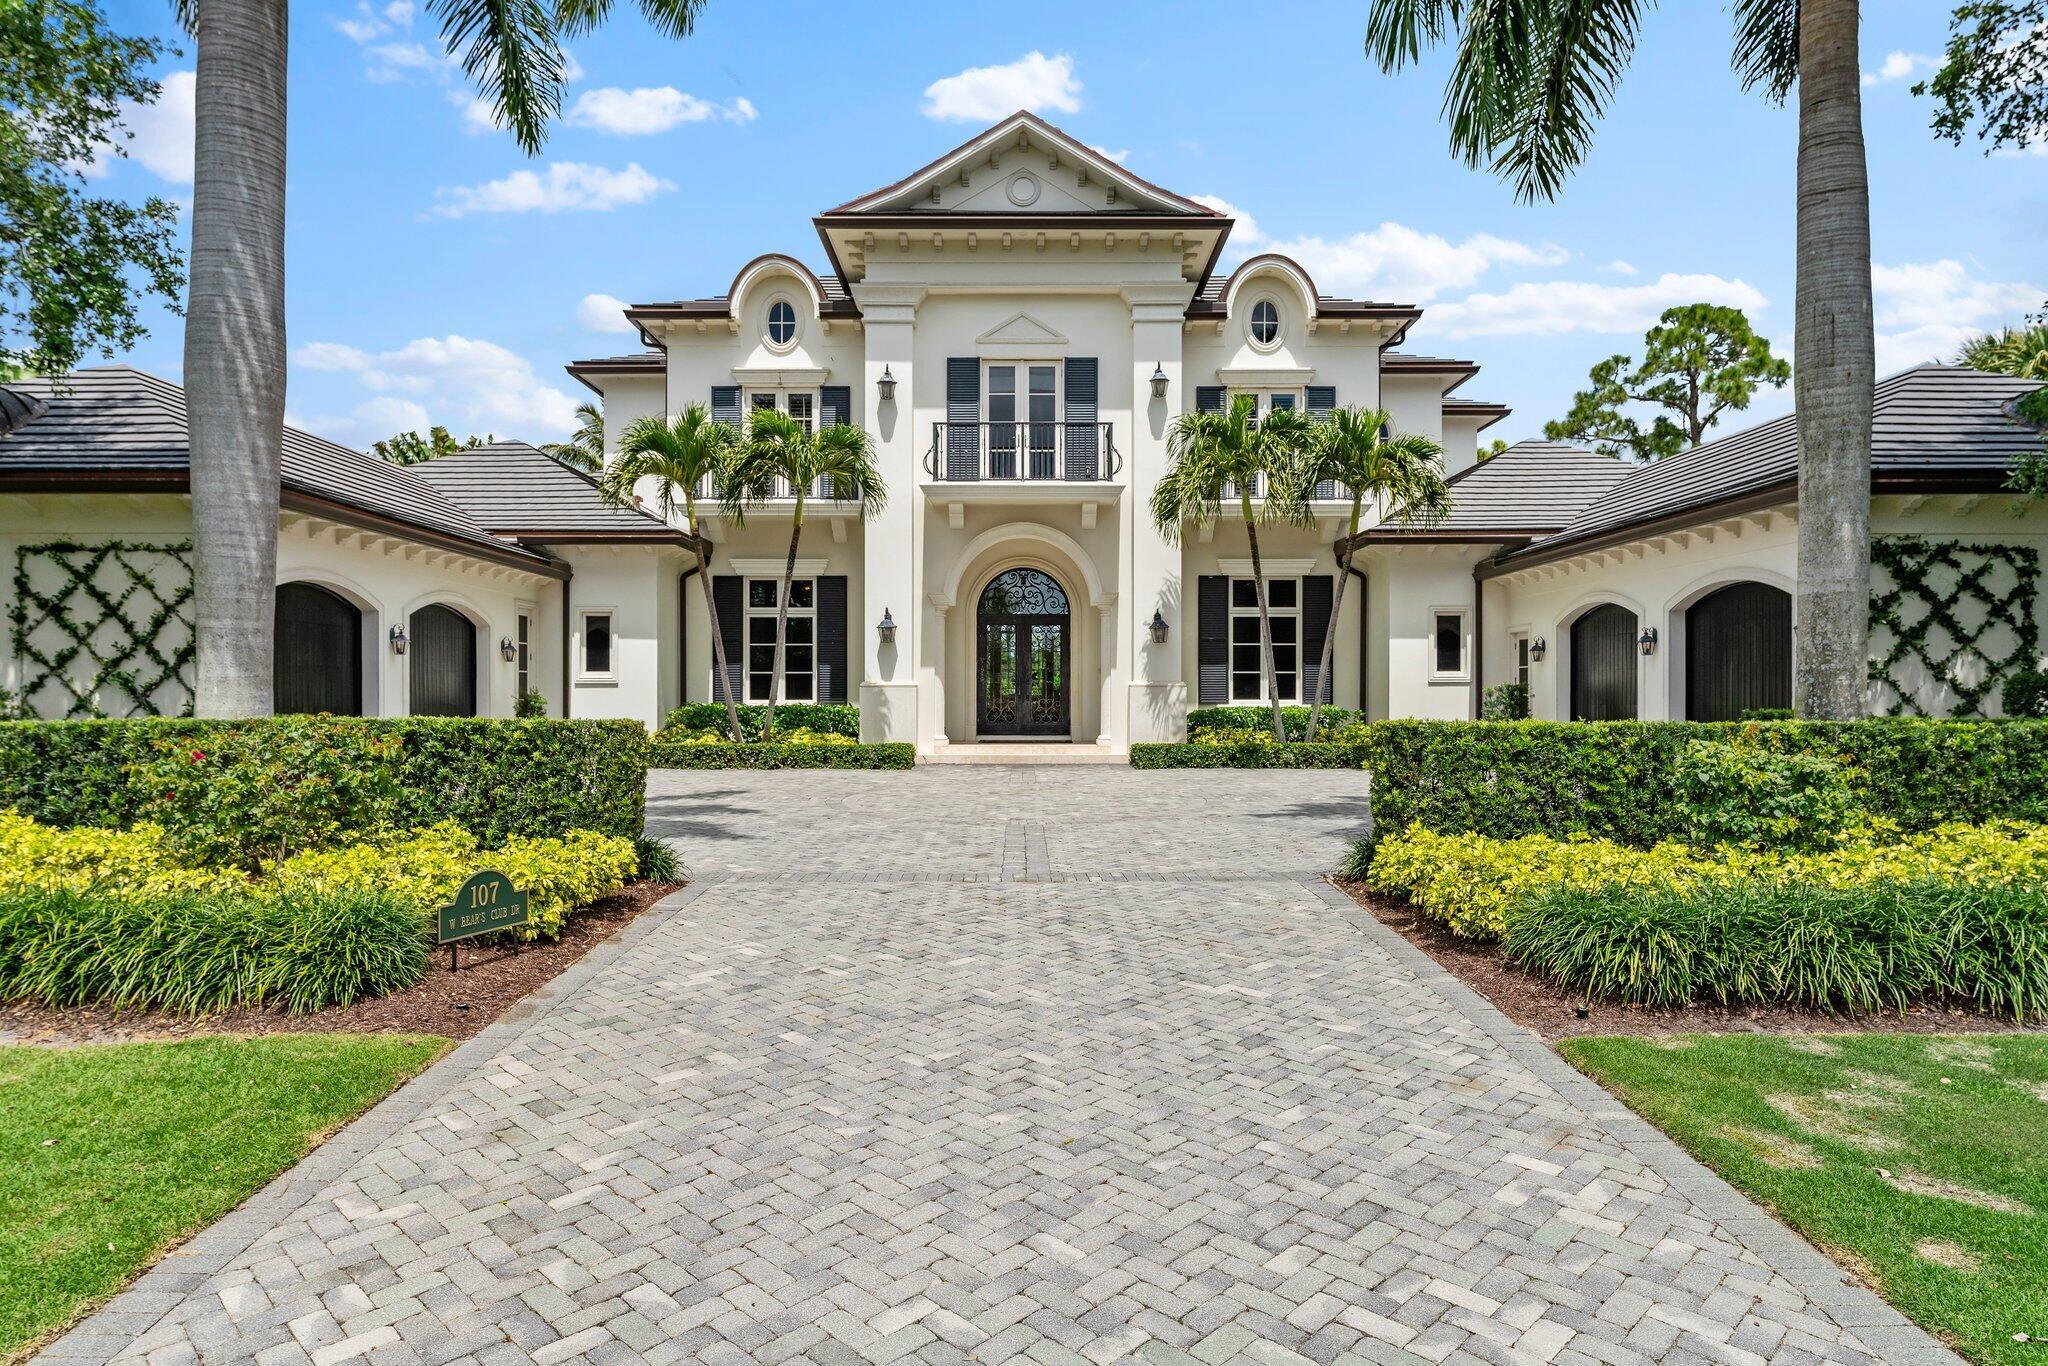 Stunning custom built estate in one of the most exclusive private communities in Palm Beach County, The Bears Club. This sprawling transitional estate offers 5 bedrooms in the main house with an additional bonus guest house suite attached to the main house with a lovely covered arched breezeway. With 5 Bedrooms, 8 full baths , and 2 half baths , this sprawling estate is nestled on nearly an acre of pristine manicured land offering some of the longest golf and lake views in The Bears Club. With extraordinary property features throughout, top tier finishes, and an upstanding transitional interior aesthetic,  Additional amenities include dual offices, home theater, full gym, wine room.  New Roof in 2022. AC square footage does not include newly enclosed loggia/summer kitchen.